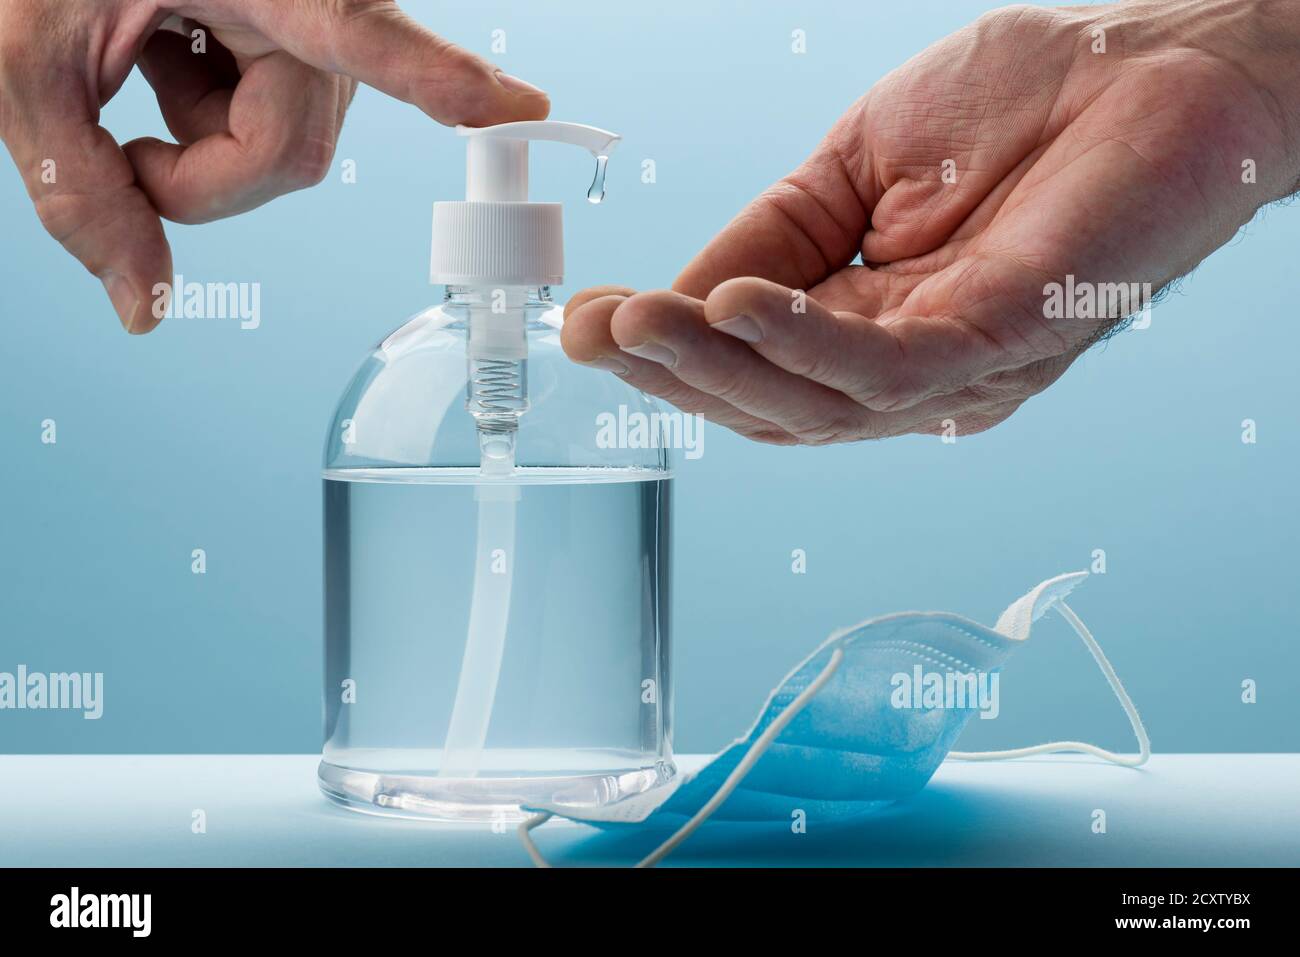 Washing hands with alcohol gel. Hygiene concept. Stock Photo